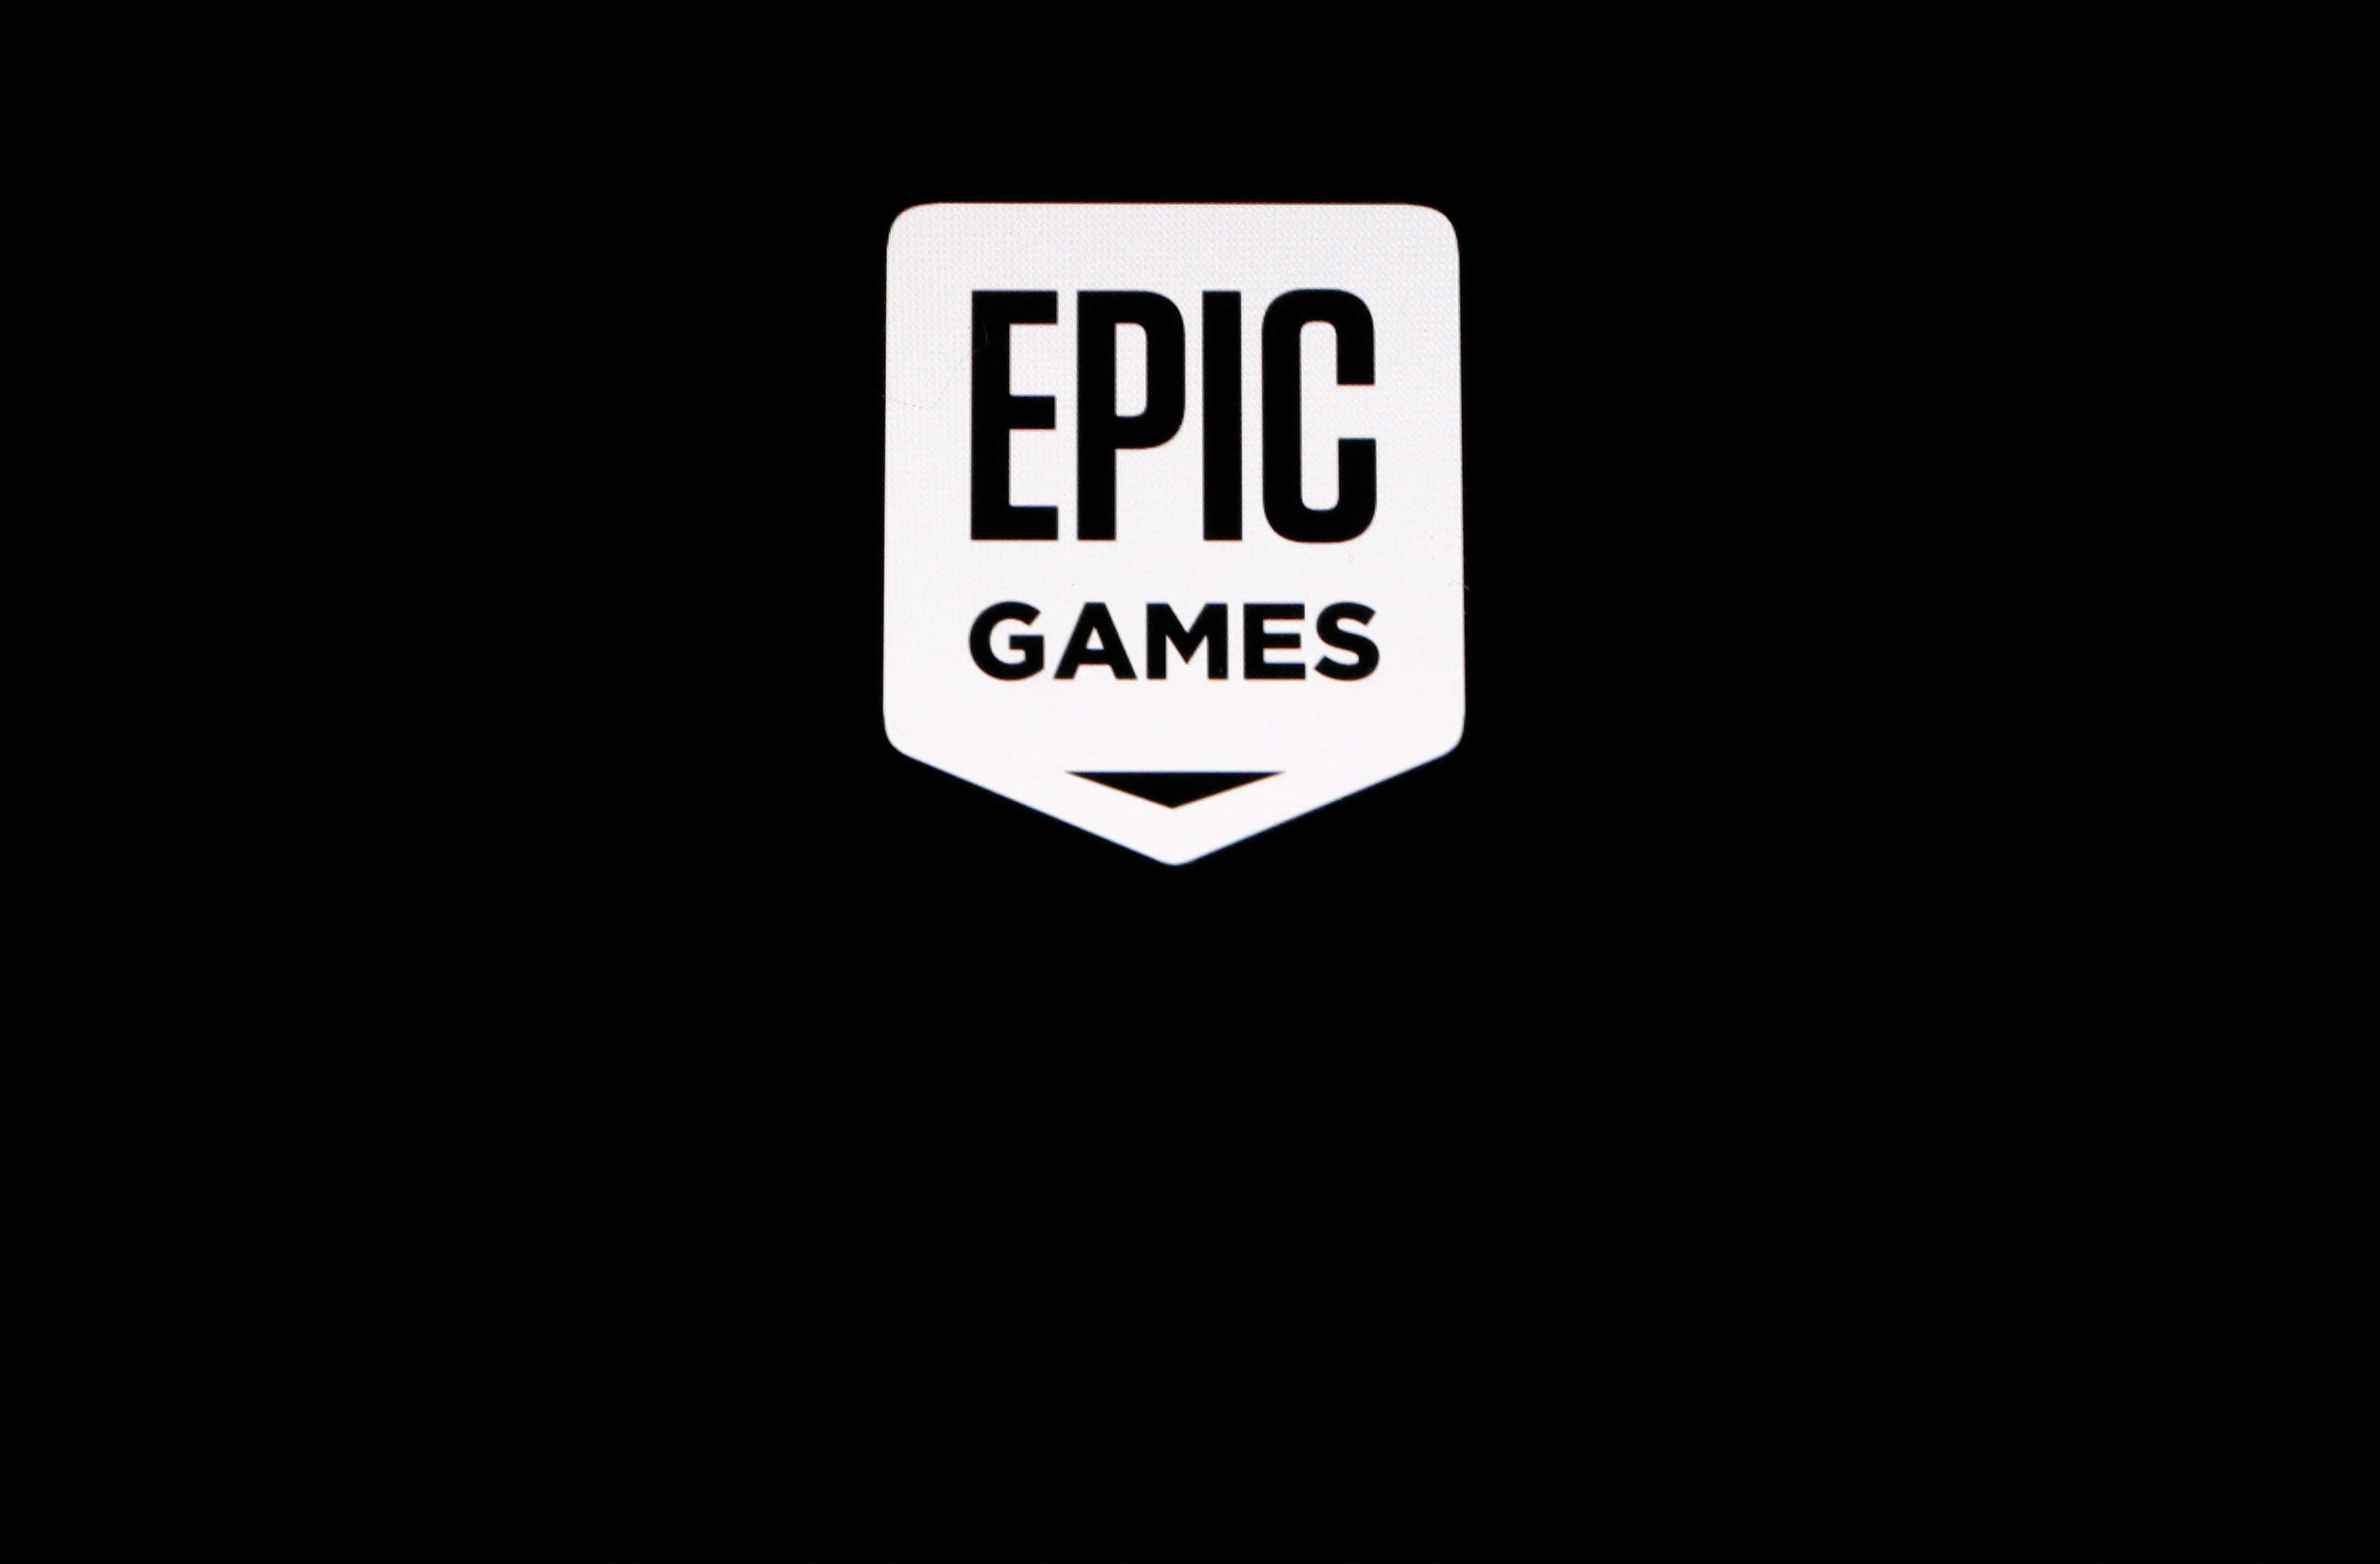 Epic Games is shedding about 830 employees, divesting Bandcamp